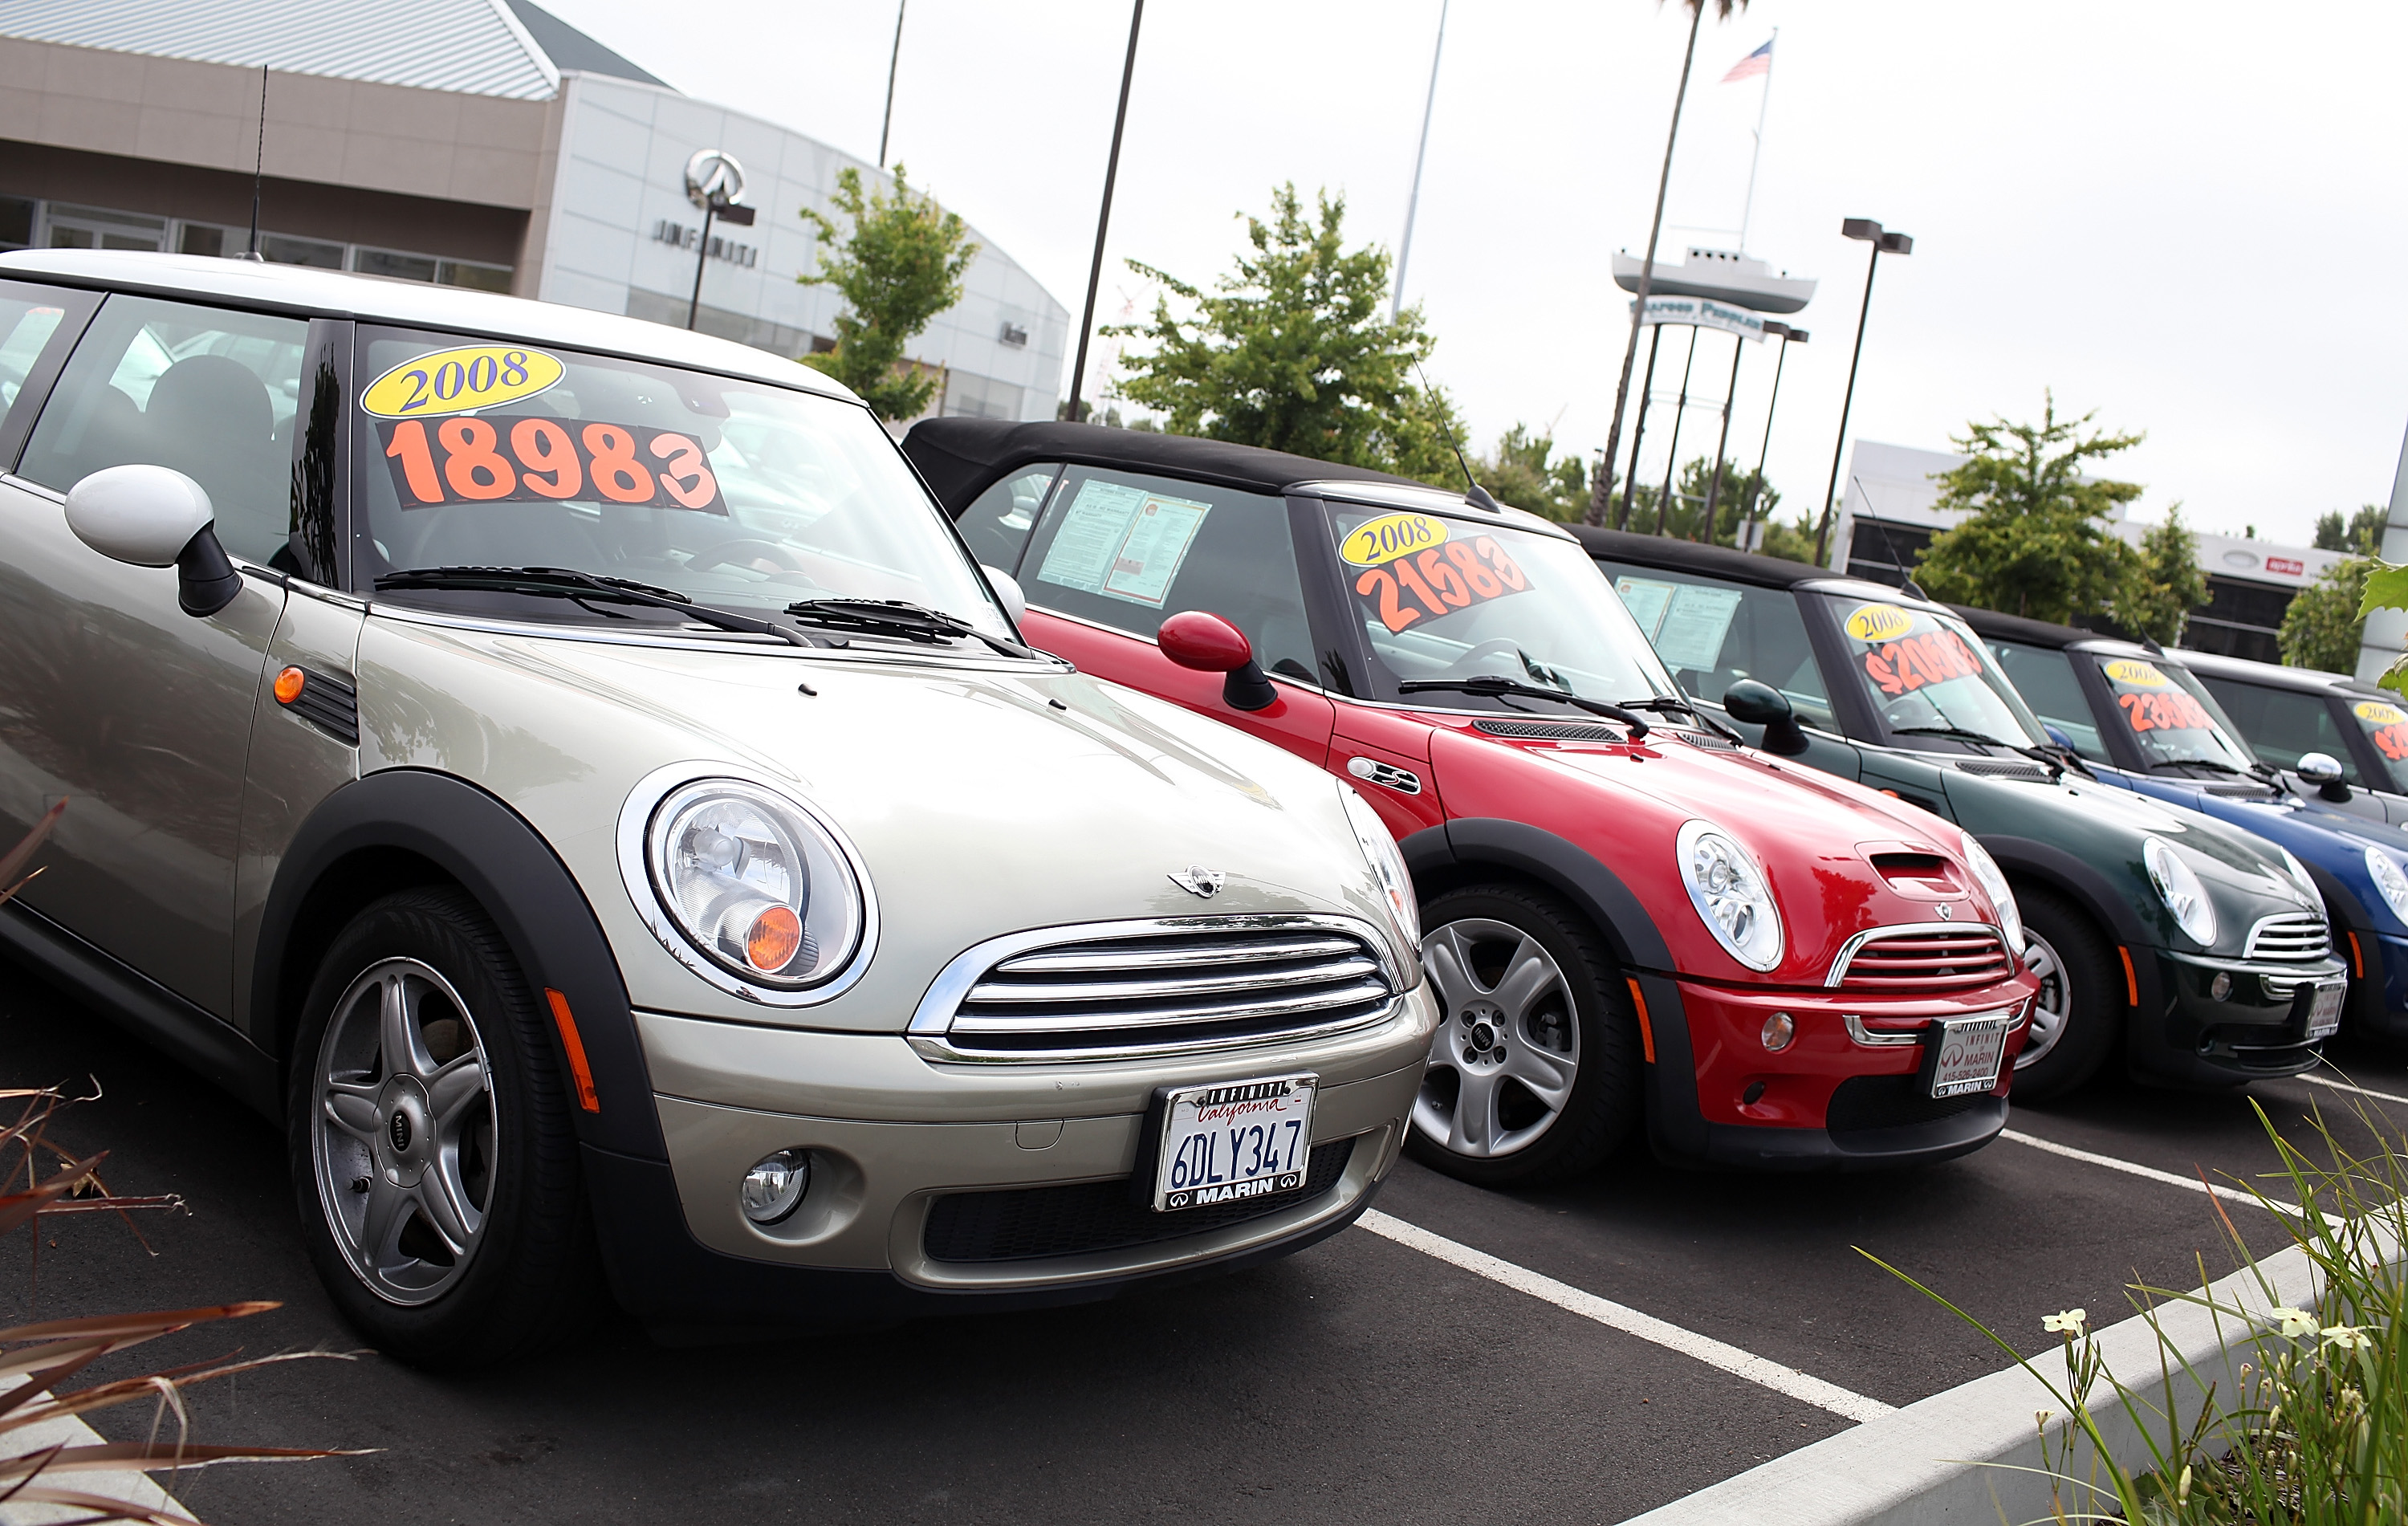 Used Car Prices Are On the Decline, According to Kelley Blue Book